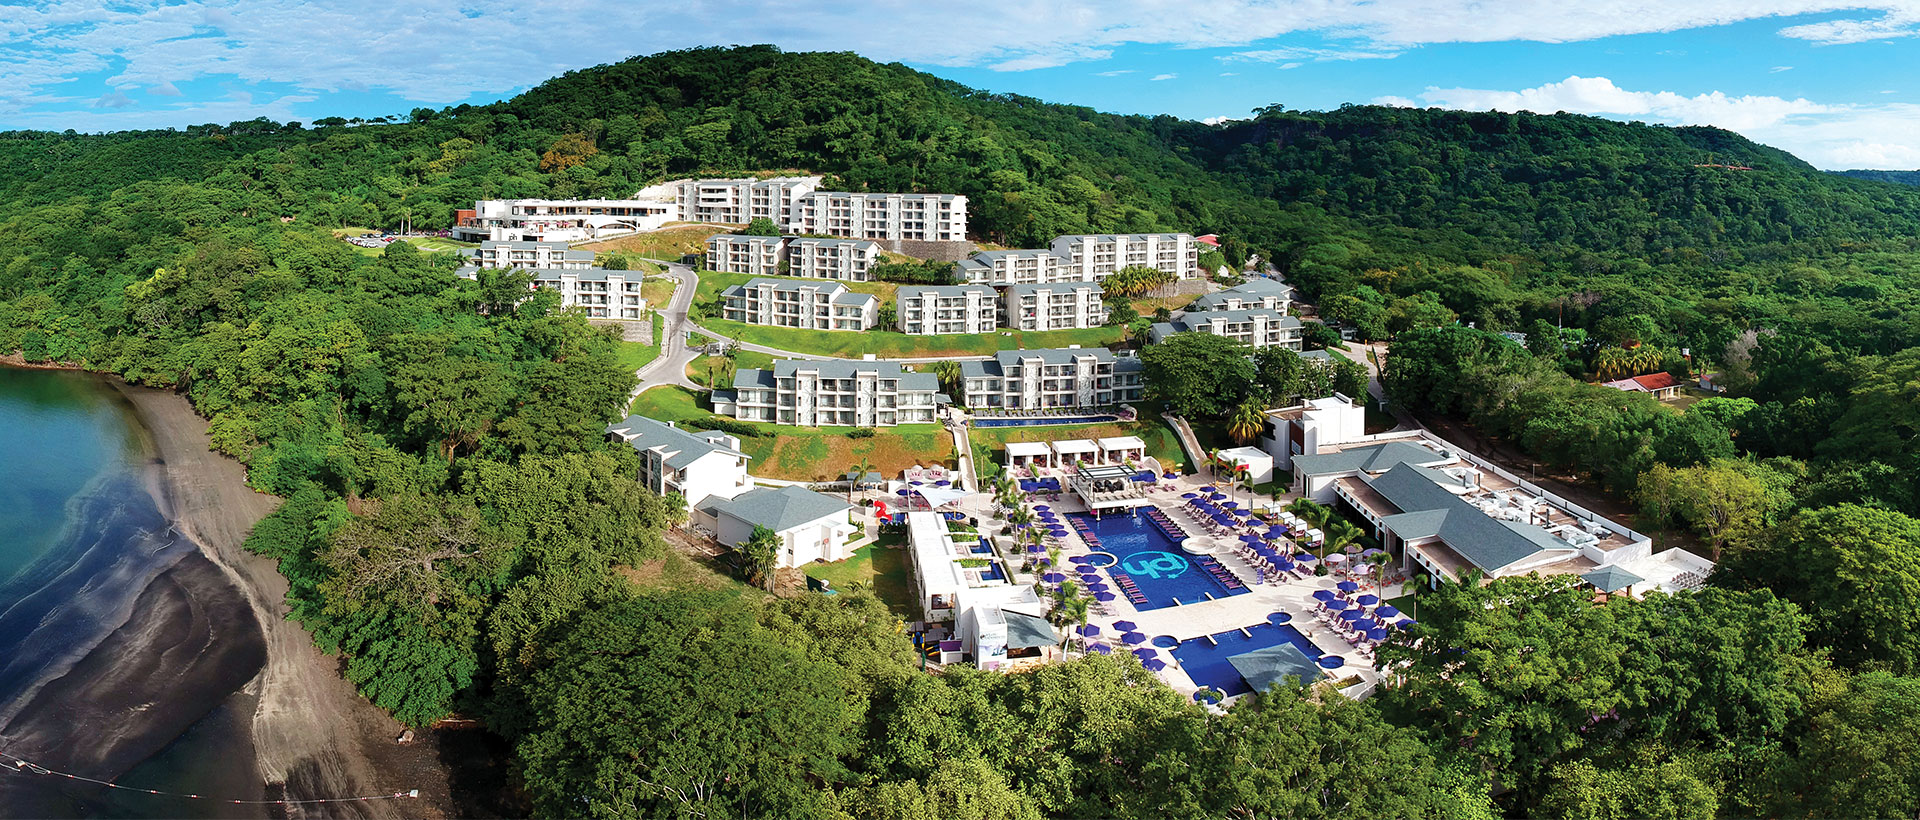 Planet Hollywood Costa Rica All-Inclusive Beach Resort